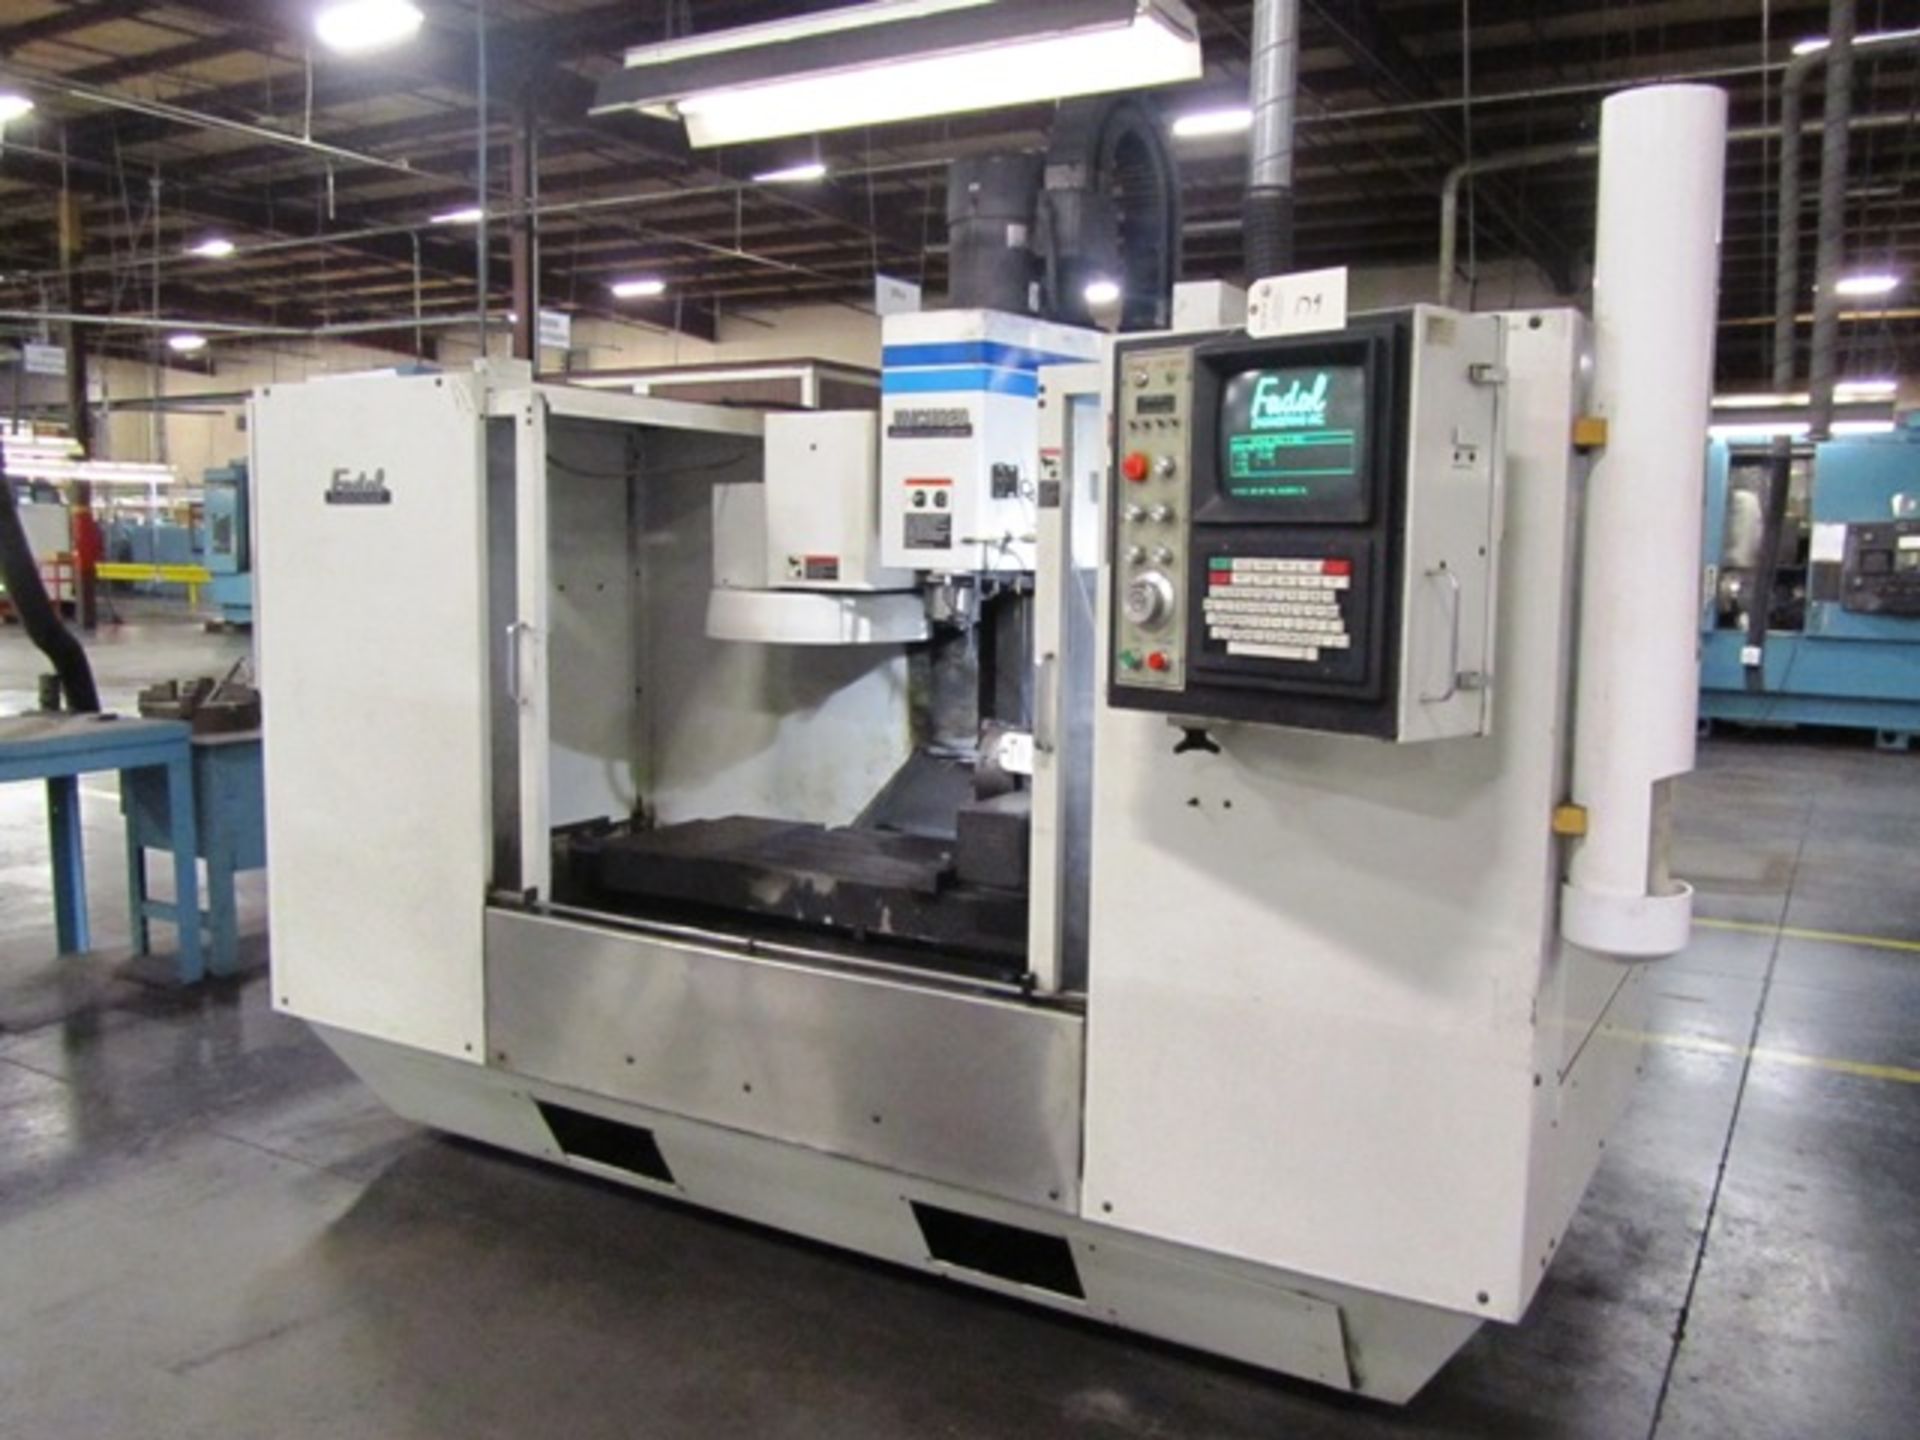 Fadal Model 4020 Vertical Machining Center with 20 ATC, 40 Taper, 20'' x 48'' Table, Fadal CNC